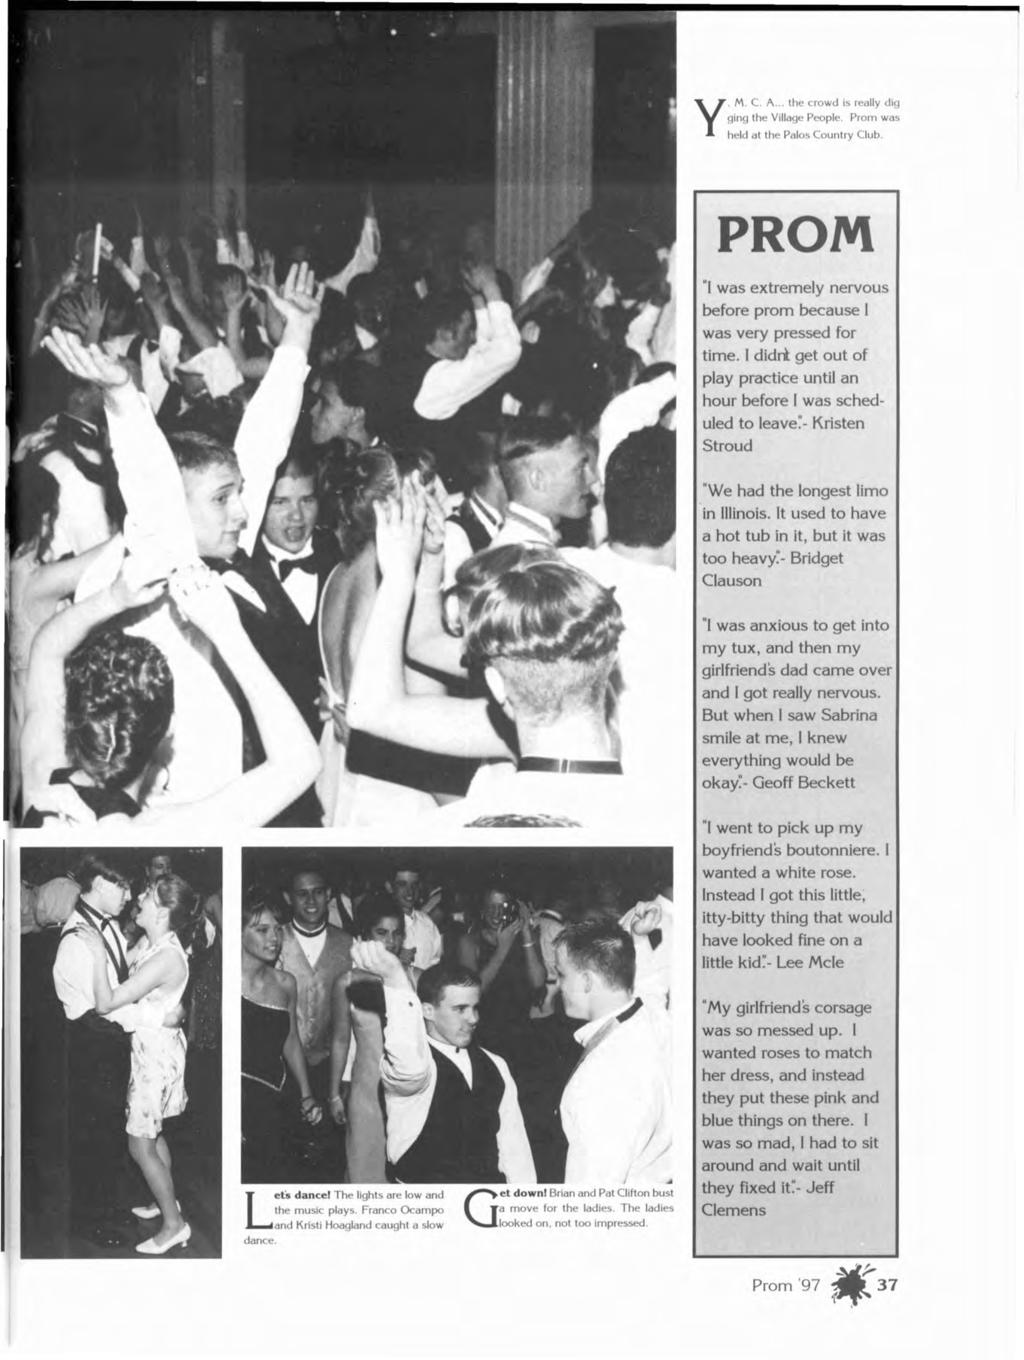 Y.M. C. A... the crowd IS really dig glng the Villag People. Prom was held at the Palos Country Club. PROM "I was extremely nervous before prom because I was very pressed for time.